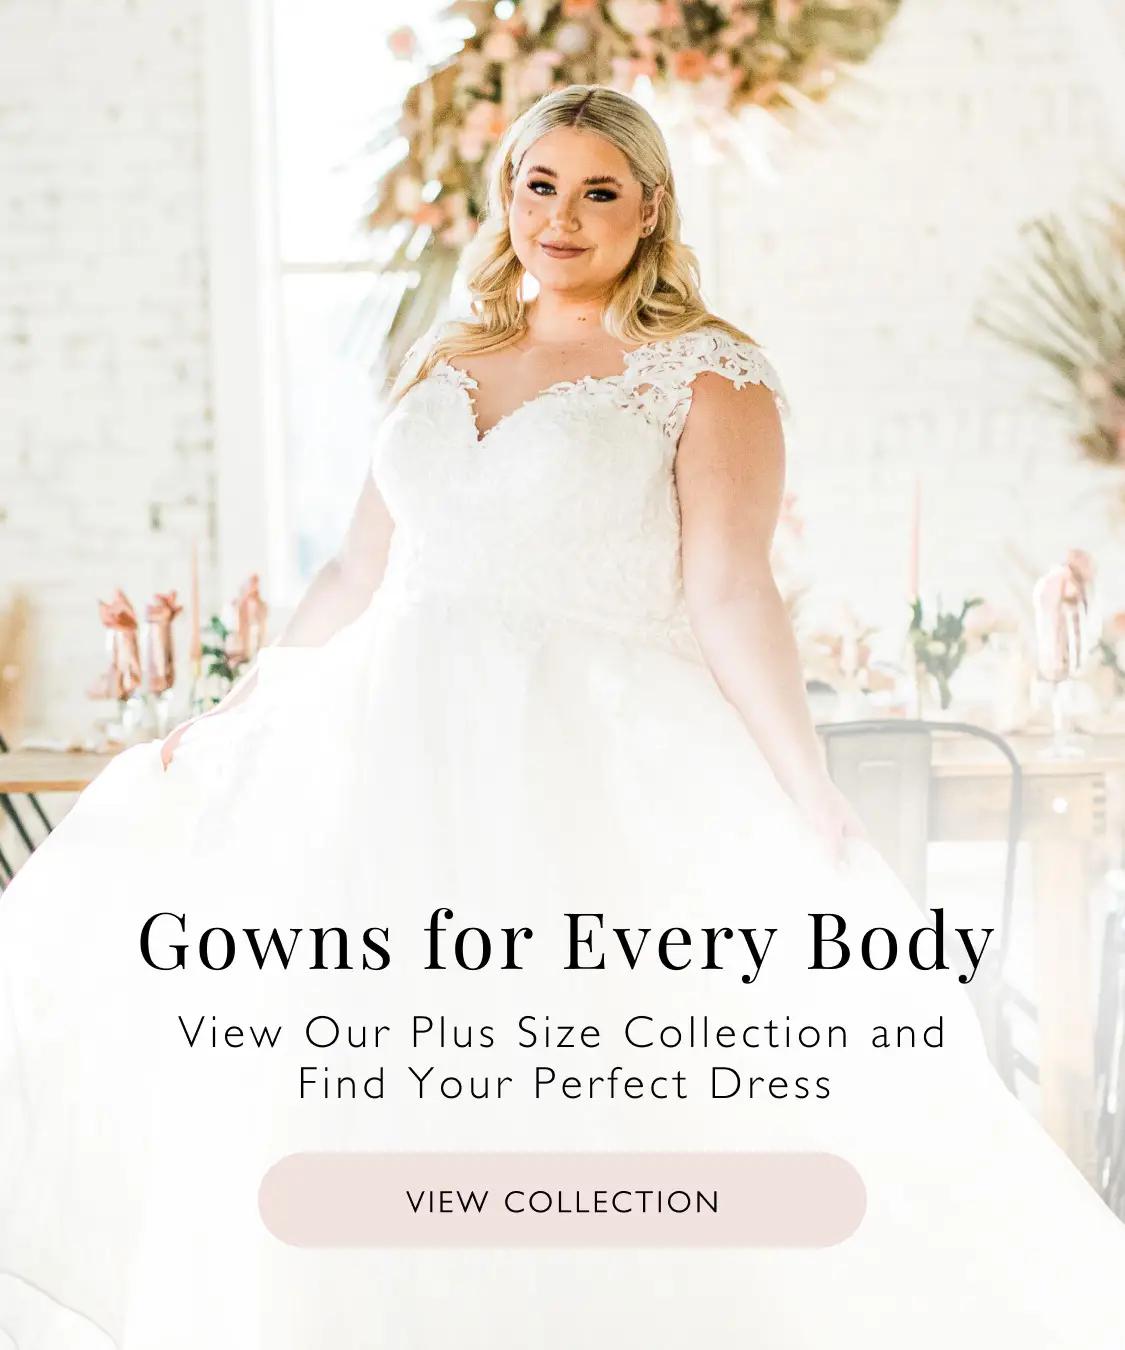 Wedding Dresses & Bridal Gowns  Your Dream Wedding Gown Awaits!